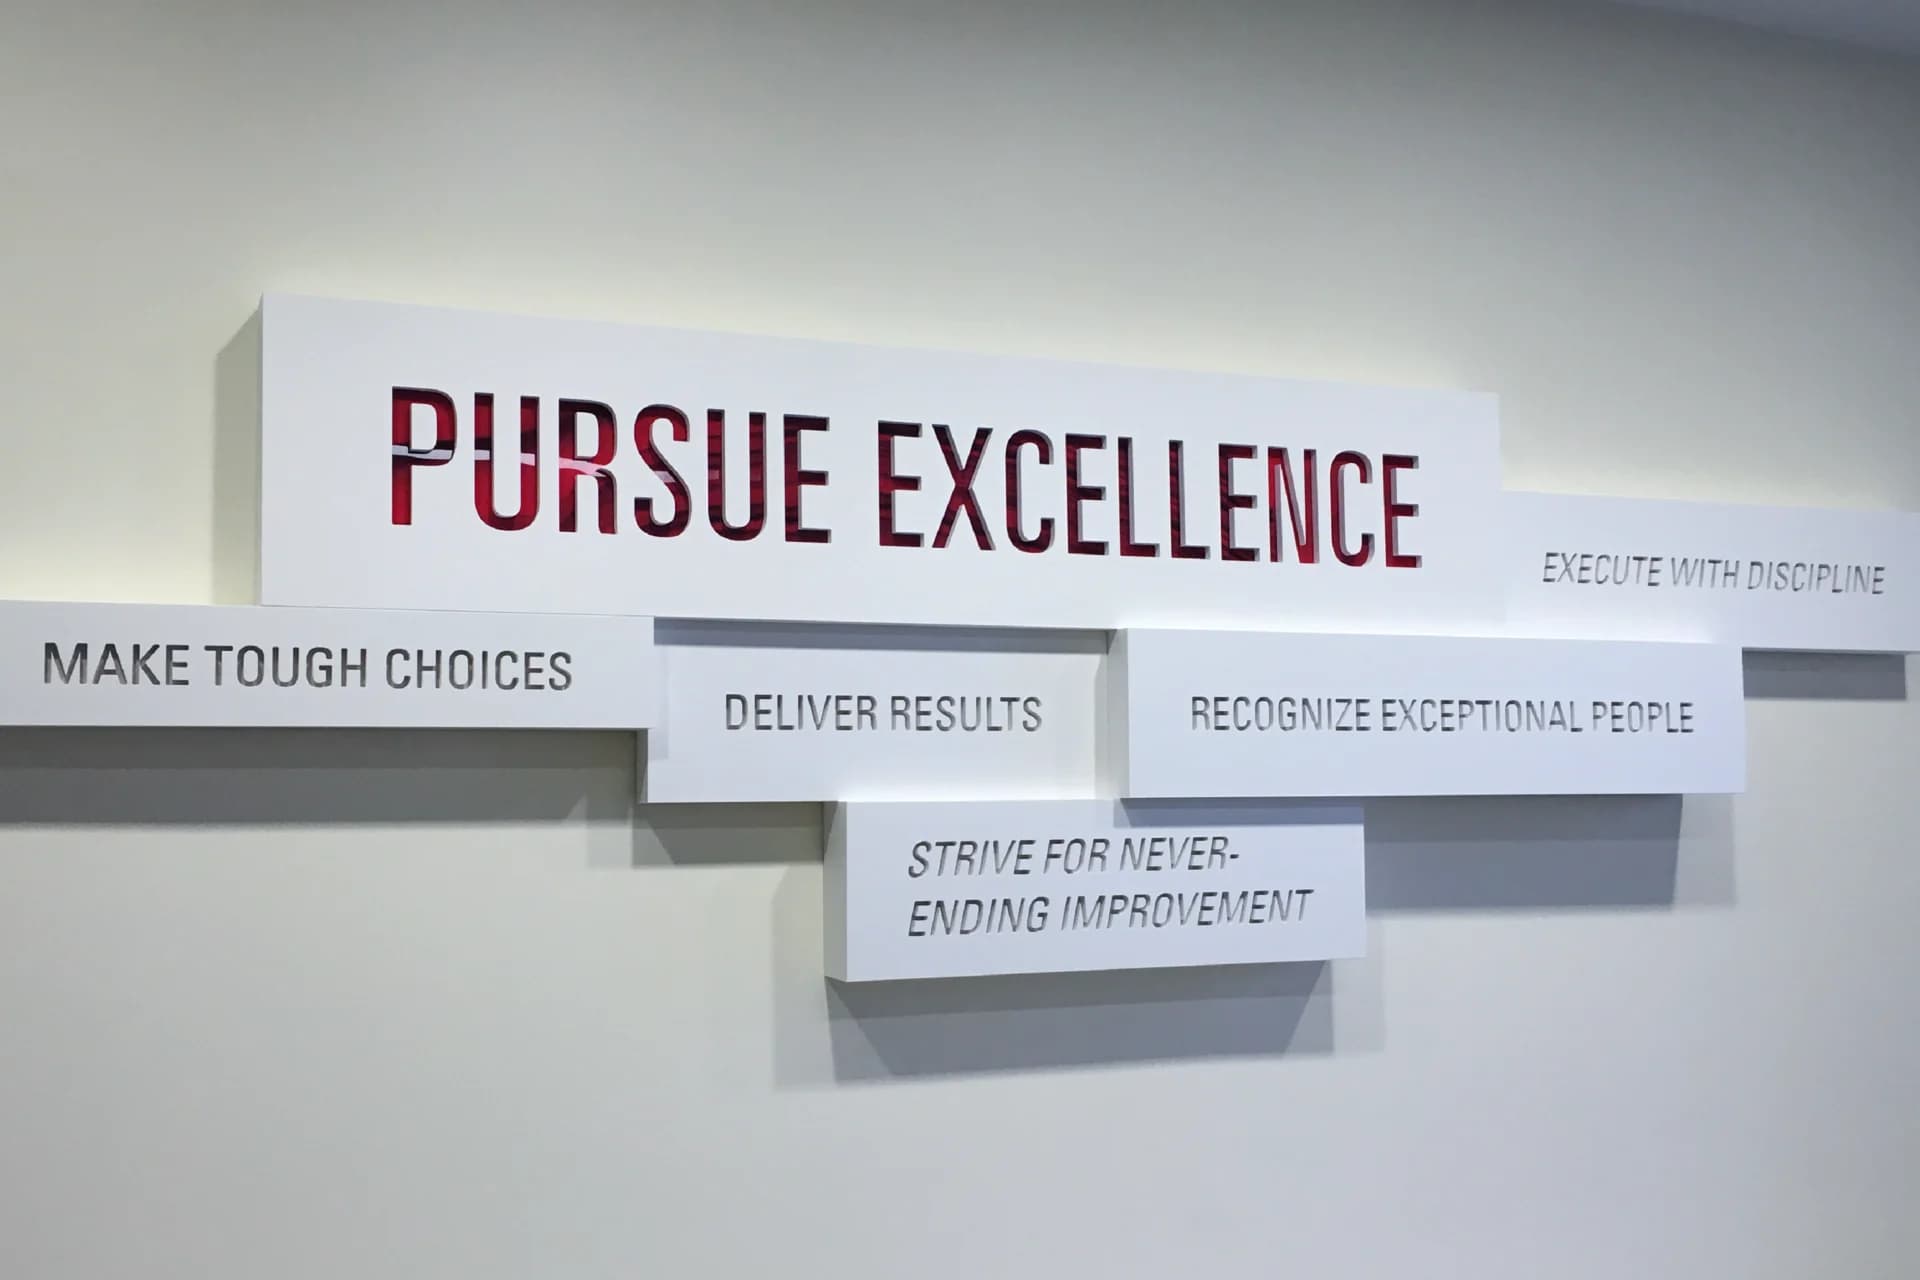 A motivational sign encouraging to pursue excellence and make tough choices